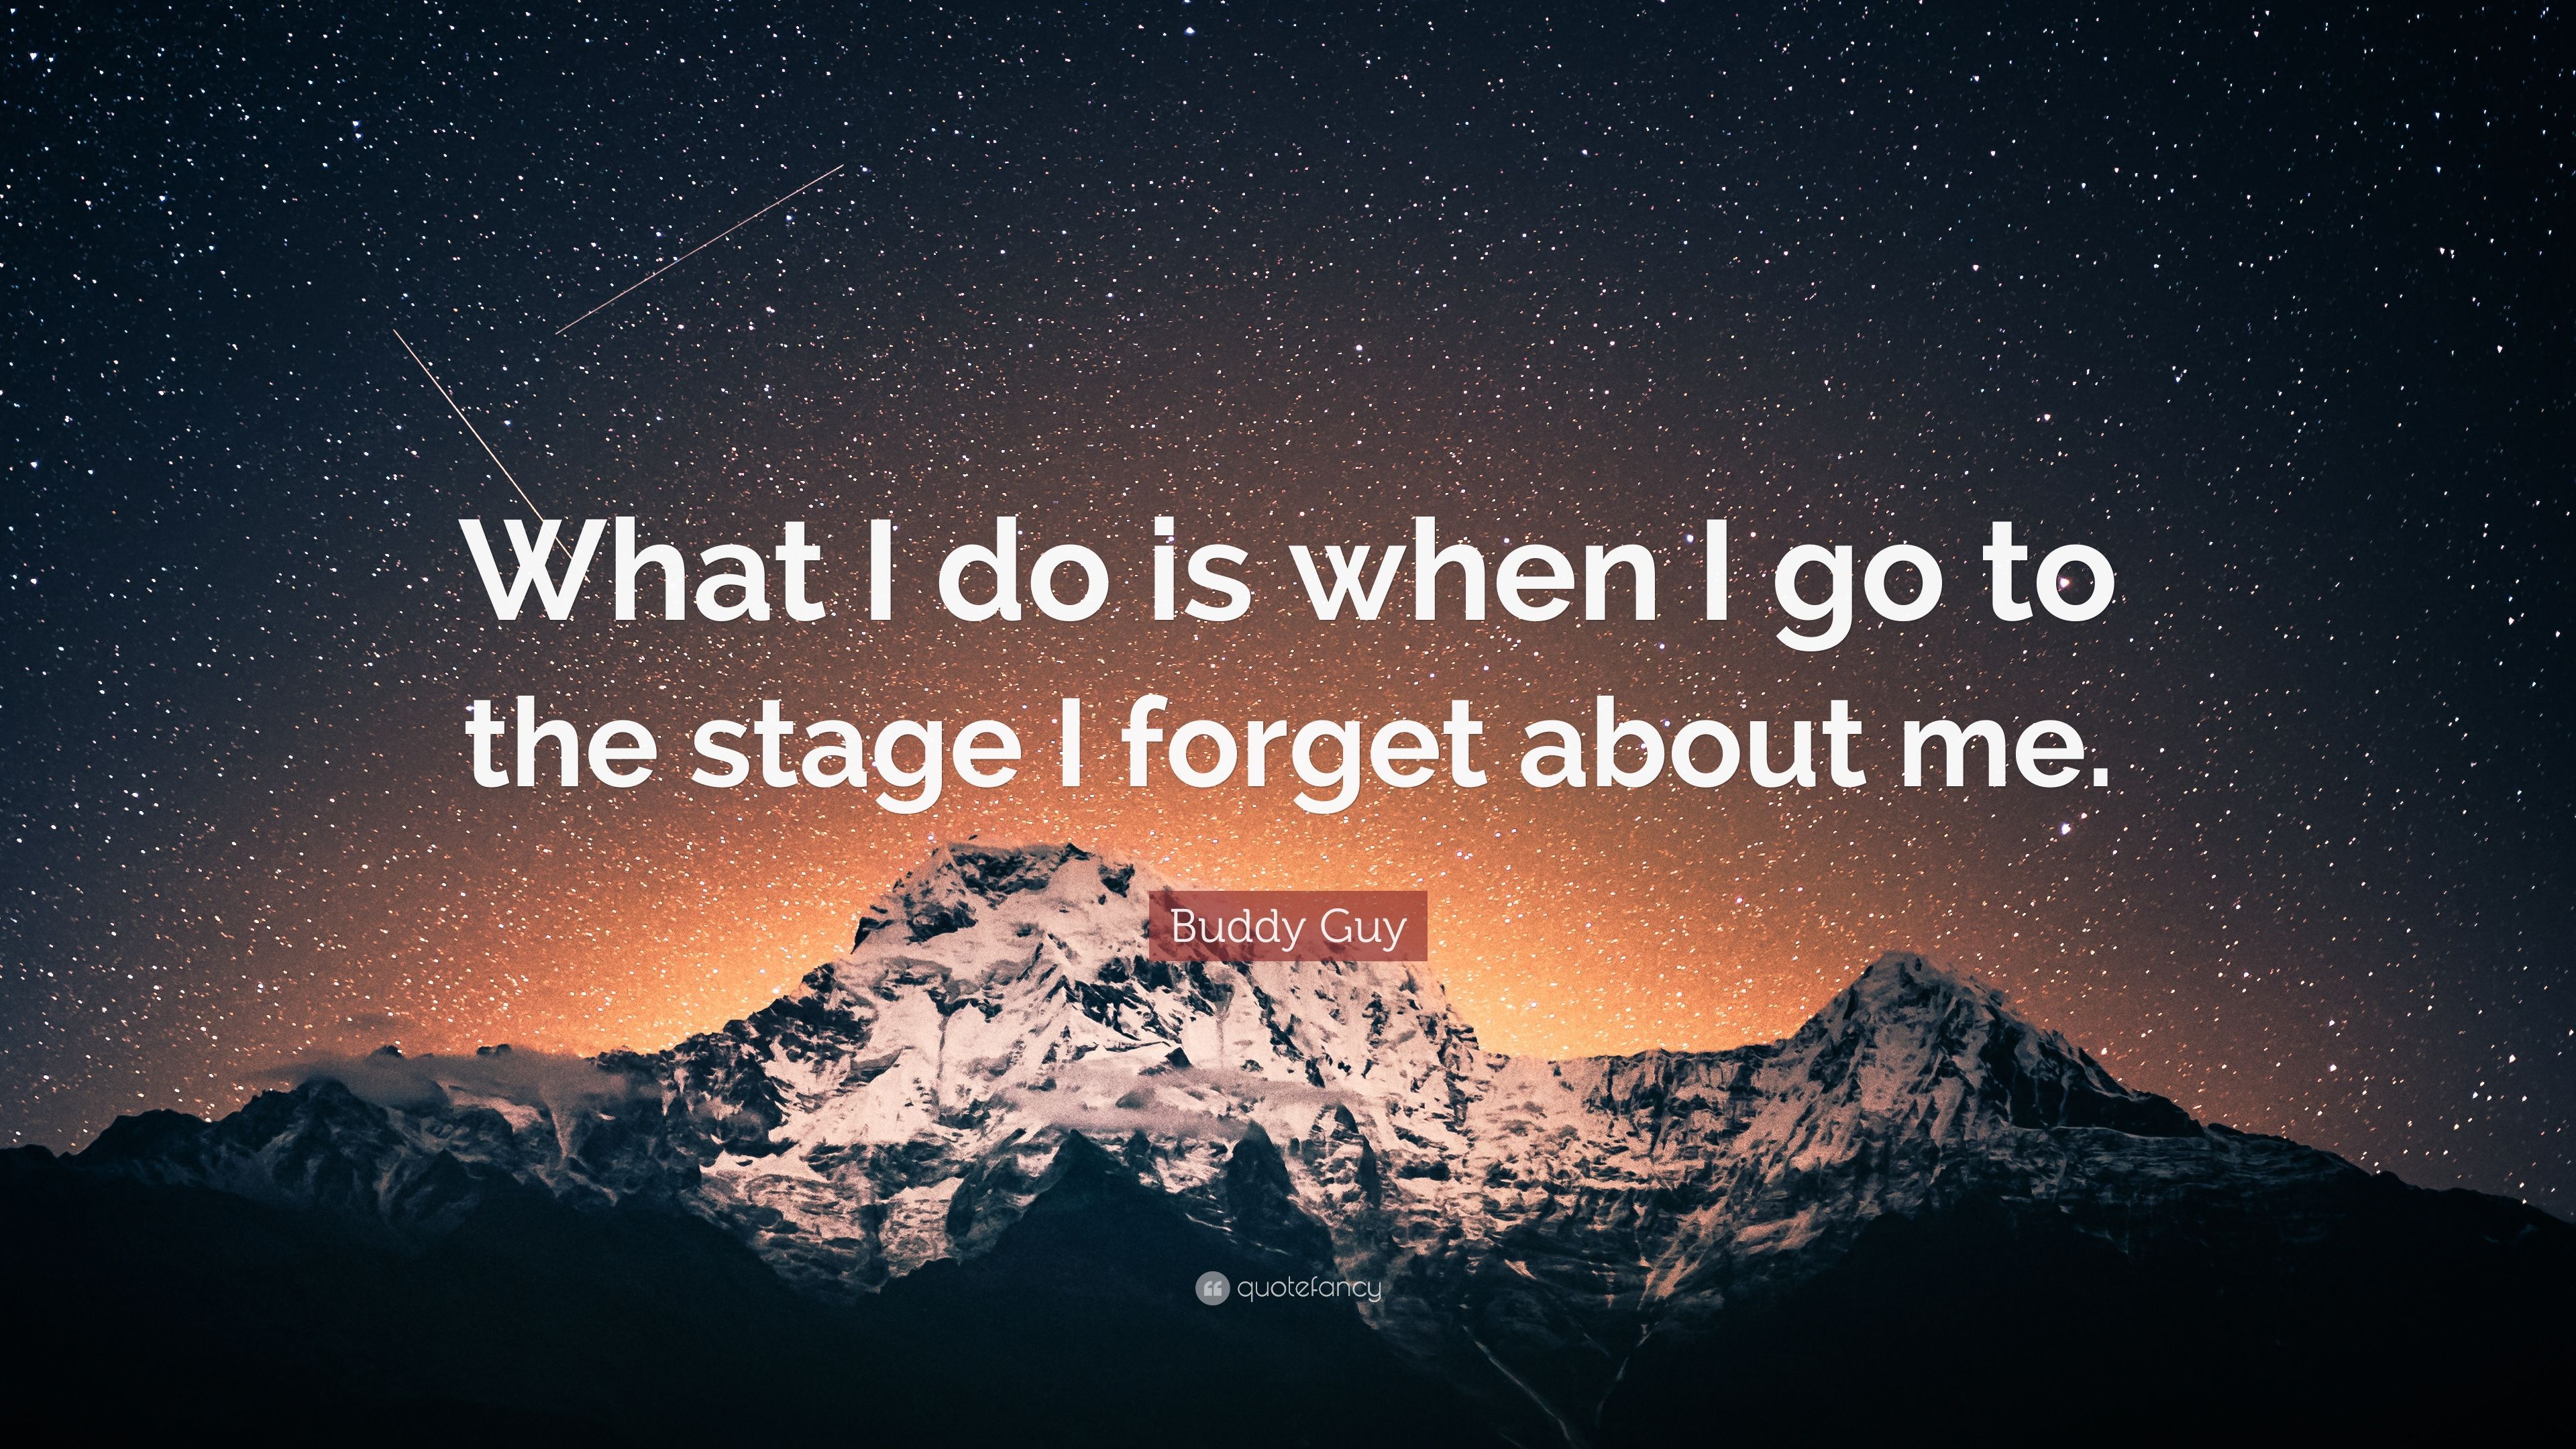 Buddy Guy Quote: "What I do is when I go to the stage I forget 